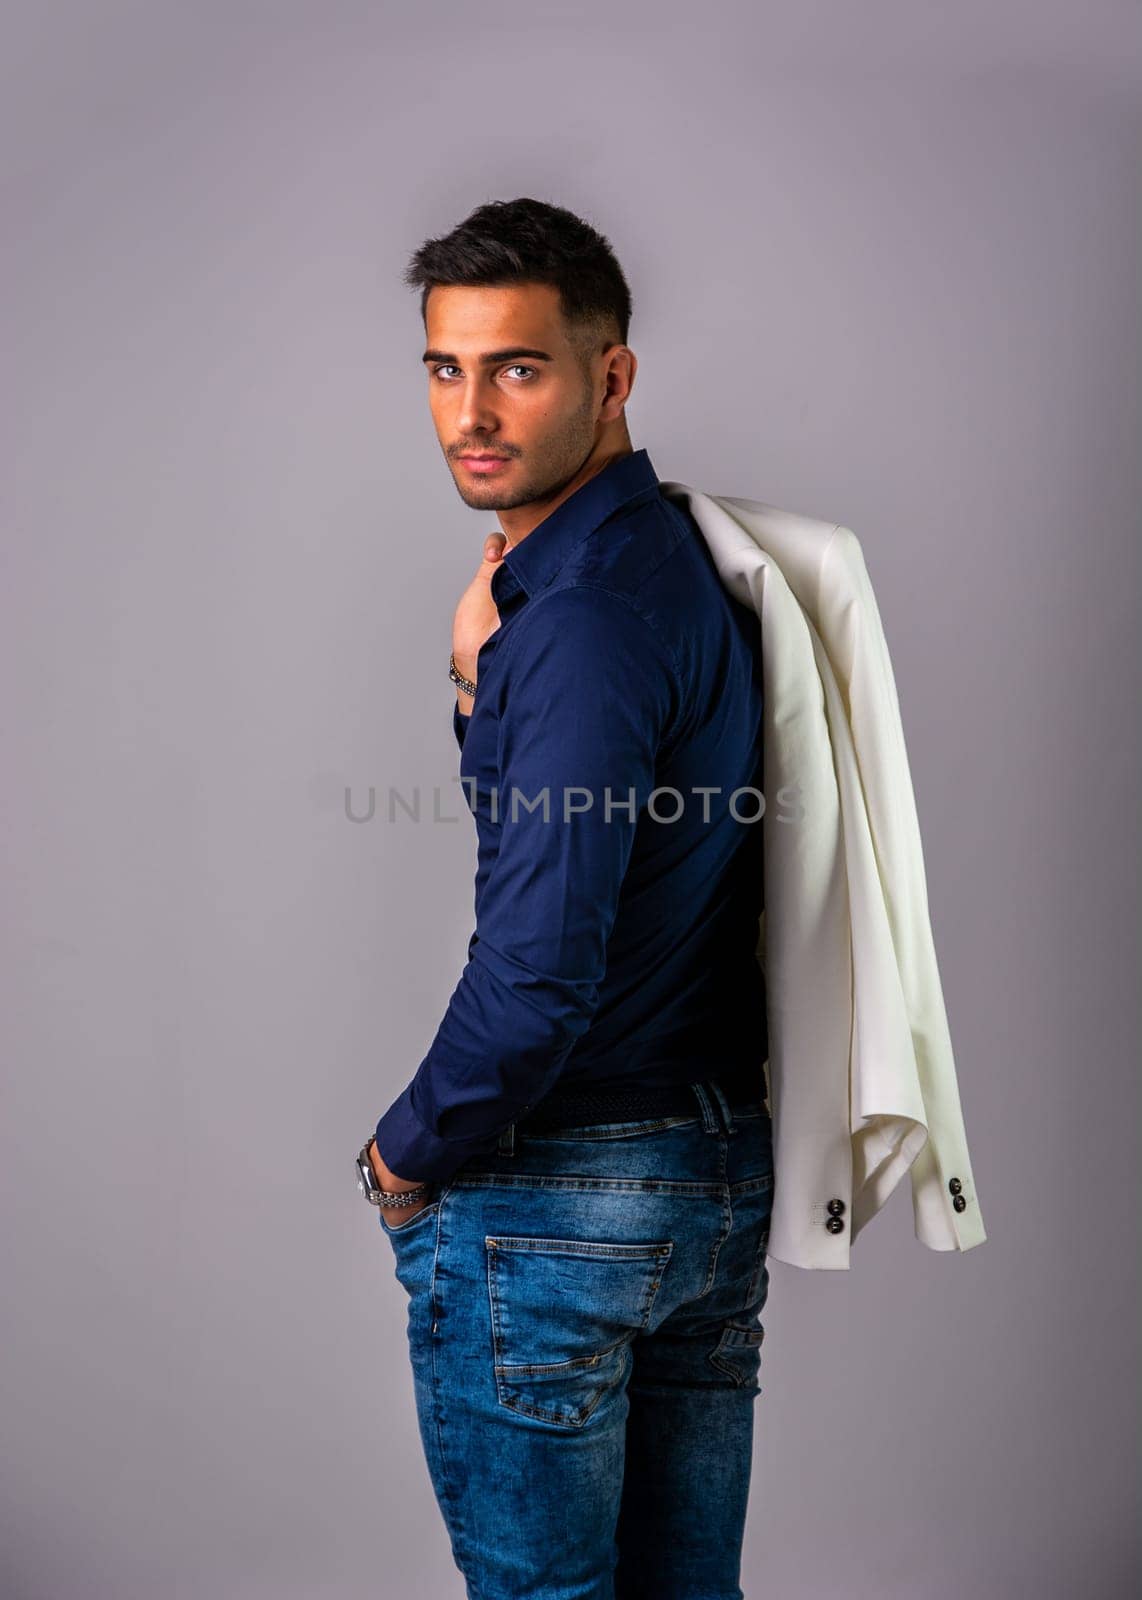 Photo of a man wearing casual clothing with a jacket slung over his shoulder by artofphoto